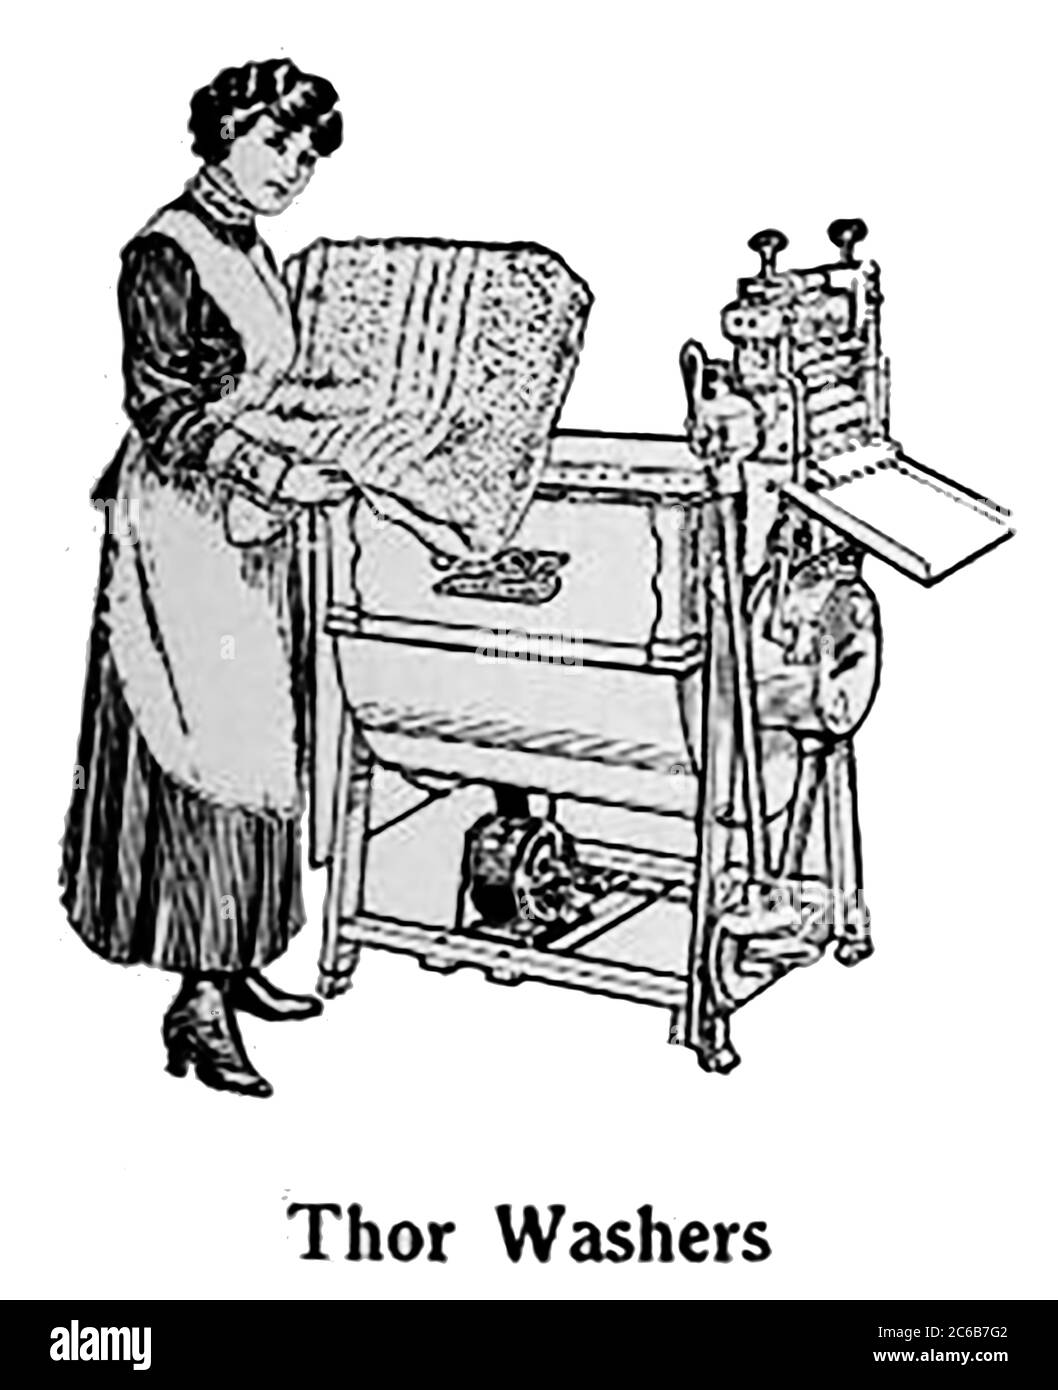 A housewife or servant using a Thor brand electric washer and ringer. (1920 image). The Thor washing machine was the first electric clothes washer sold commercially in the United States (and possibly throughout the world though this was disputed by the Nineteen Hundred Washing Machine Company of Binghamton, NY) by Chicago-based Hurley Electric Laundry Equipment Company, the 1907 Thor was invented by   Hurley engineer Alva J. Fisher. Its also been stated that  a Ford Motor Company employee invented the electric washer Stock Photo